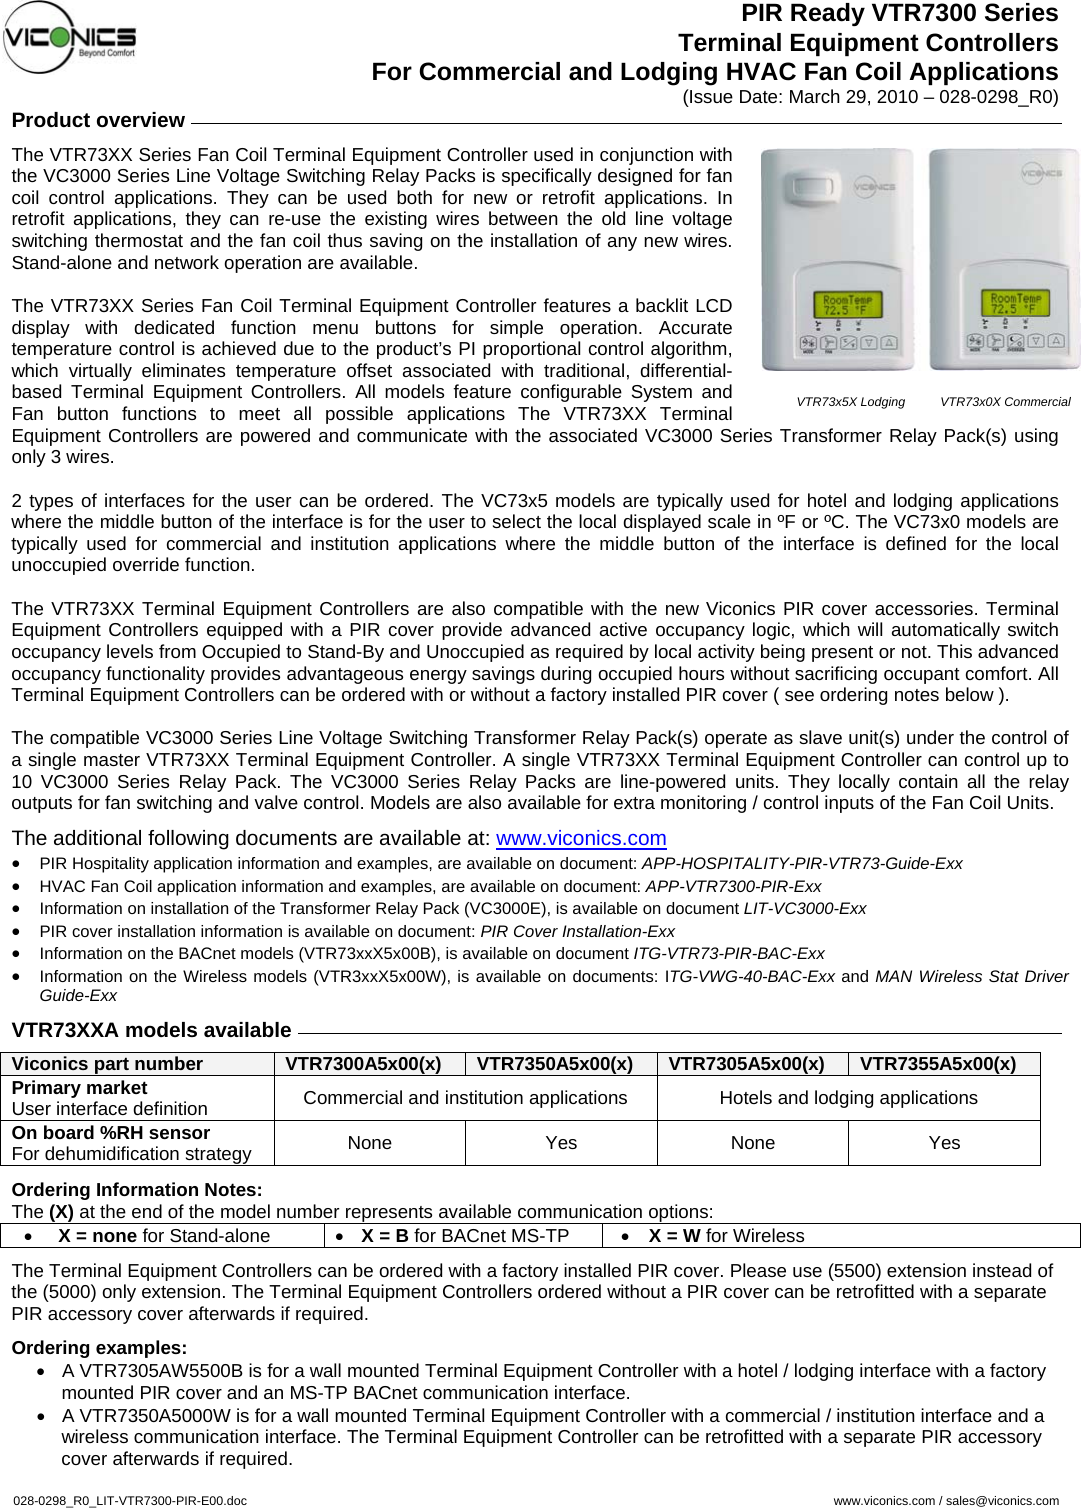 PIR Ready VTR7300 Series Terminal Equipment Controllers For Commercial and Lodging HVAC Fan Coil Applications (Issue Date: March 29, 2010 – 028-0298_R0) Product overview     The VTR73XX Series Fan Coil Terminal Equipment Controller used in conjunction with the VC3000 Series Line Voltage Switching Relay Packs is specifically designed for fan coil control applications. They can be used both for new or retrofit applications. In retrofit applications, they can re-use the existing wires between the old line voltage switching thermostat and the fan coil thus saving on the installation of any new wires. Stand-alone and network operation are available.  The VTR73XX Series Fan Coil Terminal Equipment Controller features a backlit LCD display with dedicated function menu buttons for simple operation. Accurate temperature control is achieved due to the product’s PI proportional control algorithm, which virtually eliminates temperature offset associated with traditional, differential-based Terminal Equipment Controllers. All models feature configurable System and Fan button functions to meet all possible applications The VTR73XX Terminal Equipment Controllers are powered and communicate with the associated VC3000 Series Transformer Relay Pack(s) using only 3 wires.  2 types of interfaces for the user can be ordered. The VC73x5 models are typically used for hotel and lodging applications where the middle button of the interface is for the user to select the local displayed scale in ºF or ºC. The VC73x0 models are typically used for commercial and institution applications where the middle button of the interface is defined for the local unoccupied override function.  The VTR73XX Terminal Equipment Controllers are also compatible with the new Viconics PIR cover accessories. Terminal Equipment Controllers equipped with a PIR cover provide advanced active occupancy logic, which will automatically switch occupancy levels from Occupied to Stand-By and Unoccupied as required by local activity being present or not. This advanced occupancy functionality provides advantageous energy savings during occupied hours without sacrificing occupant comfort. All Terminal Equipment Controllers can be ordered with or without a factory installed PIR cover ( see ordering notes below ).  The compatible VC3000 Series Line Voltage Switching Transformer Relay Pack(s) operate as slave unit(s) under the control of a single master VTR73XX Terminal Equipment Controller. A single VTR73XX Terminal Equipment Controller can control up to 10 VC3000 Series Relay Pack. The VC3000 Series Relay Packs are line-powered units. They locally contain all the relay outputs for fan switching and valve control. Models are also available for extra monitoring / control inputs of the Fan Coil Units. The additional following documents are available at: www.viconics.com • PIR Hospitality application information and examples, are available on document: APP-HOSPITALITY-PIR-VTR73-Guide-Exx • HVAC Fan Coil application information and examples, are available on document: APP-VTR7300-PIR-Exx • Information on installation of the Transformer Relay Pack (VC3000E), is available on document LIT-VC3000-Exx • PIR cover installation information is available on document: PIR Cover Installation-Exx • Information on the BACnet models (VTR73xxX5x00B), is available on document ITG-VTR73-PIR-BAC-Exx • Information on the Wireless models (VTR3xxX5x00W), is available on documents: ITG-VWG-40-BAC-Exx and MAN Wireless Stat Driver Guide-Exx  VTR73XXA models available     Viconics part number  VTR7300A5x00(x)  VTR7350A5x00(x)  VTR7305A5x00(x)  VTR7355A5x00(x) Primary market User interface definition  Commercial and institution applications  Hotels and lodging applications On board %RH sensor For dehumidification strategy  None Yes None Yes  Ordering Information Notes: The (X) at the end of the model number represents available communication options:  • X = none for Stand-alone  • X = B for BACnet MS-TP  • X = W for Wireless  The Terminal Equipment Controllers can be ordered with a factory installed PIR cover. Please use (5500) extension instead of the (5000) only extension. The Terminal Equipment Controllers ordered without a PIR cover can be retrofitted with a separate PIR accessory cover afterwards if required.   Ordering examples:  •  A VTR7305AW5500B is for a wall mounted Terminal Equipment Controller with a hotel / lodging interface with a factory mounted PIR cover and an MS-TP BACnet communication interface. •  A VTR7350A5000W is for a wall mounted Terminal Equipment Controller with a commercial / institution interface and a wireless communication interface. The Terminal Equipment Controller can be retrofitted with a separate PIR accessory cover afterwards if required.   028-0298_R0_LIT-VTR7300-PIR-E00.doc     www.viconics.com / sales@viconics.com  VTR73x5X Lodging          VTR73x0X Commercial 